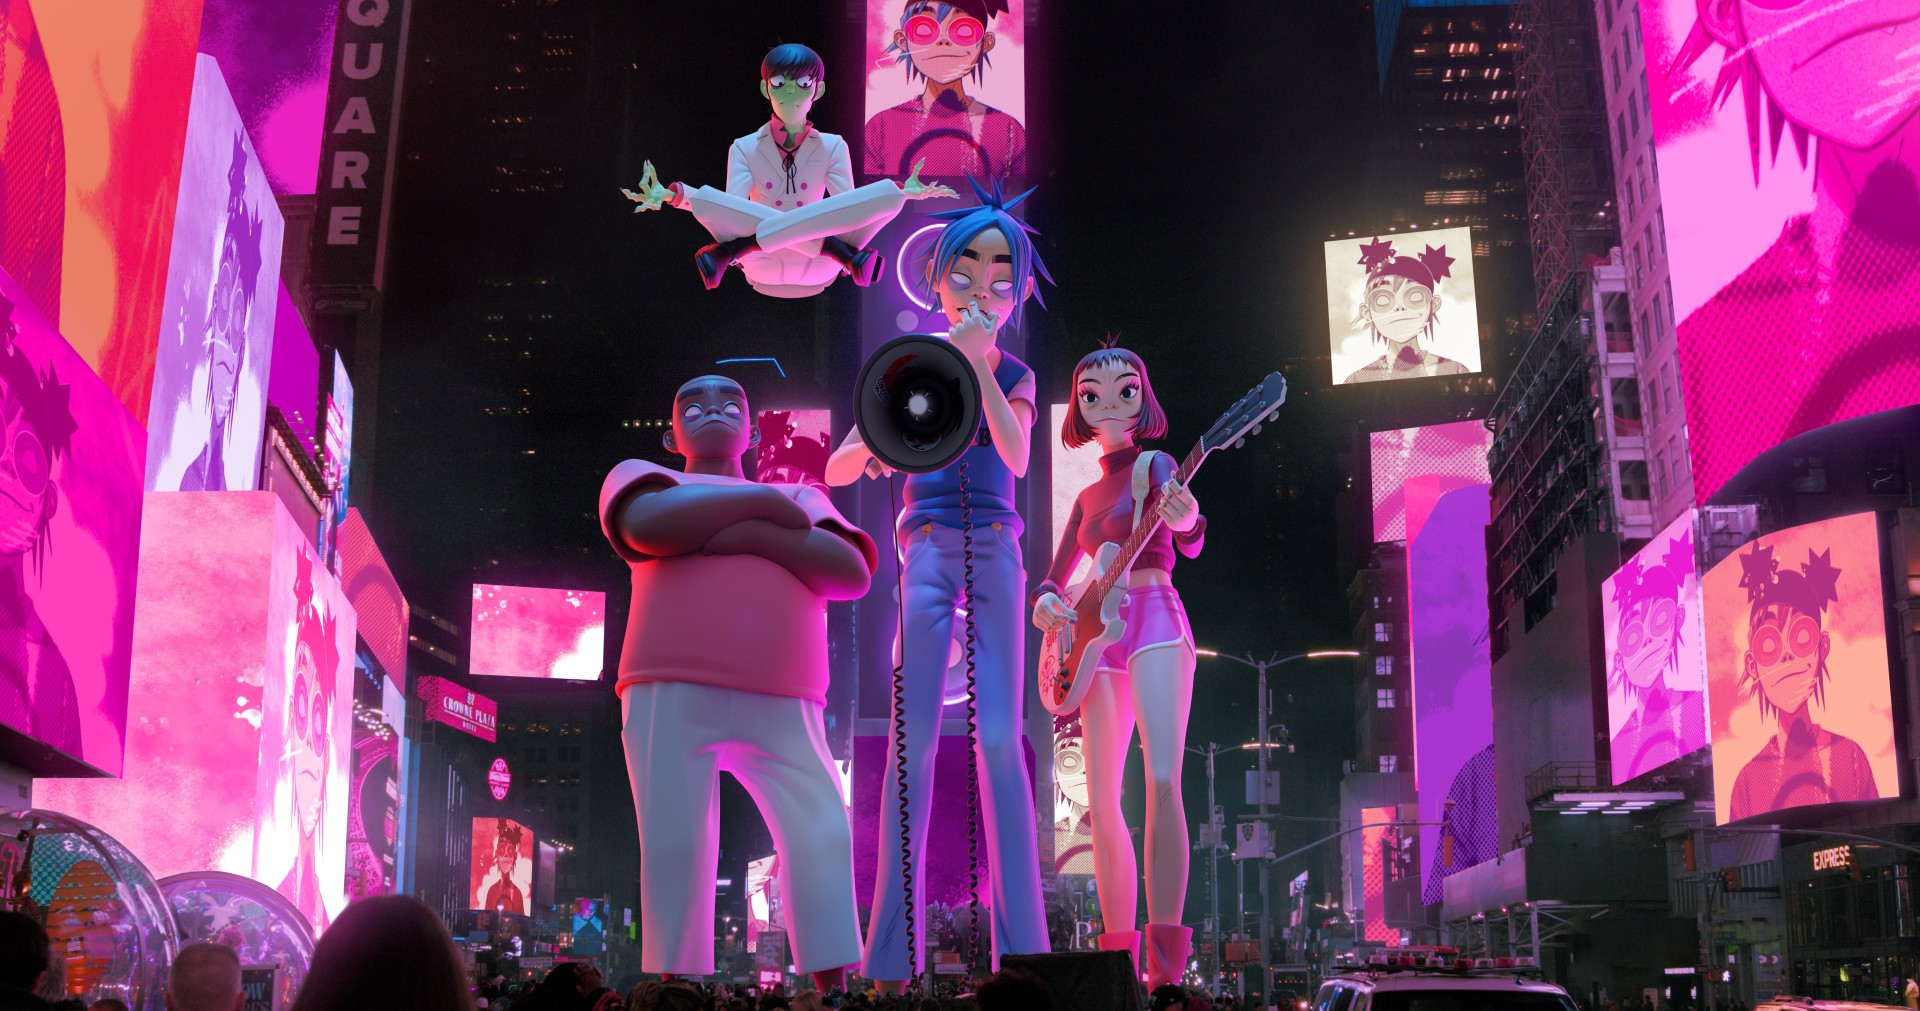 Gorillaz take over the urban jungle with immersive AR